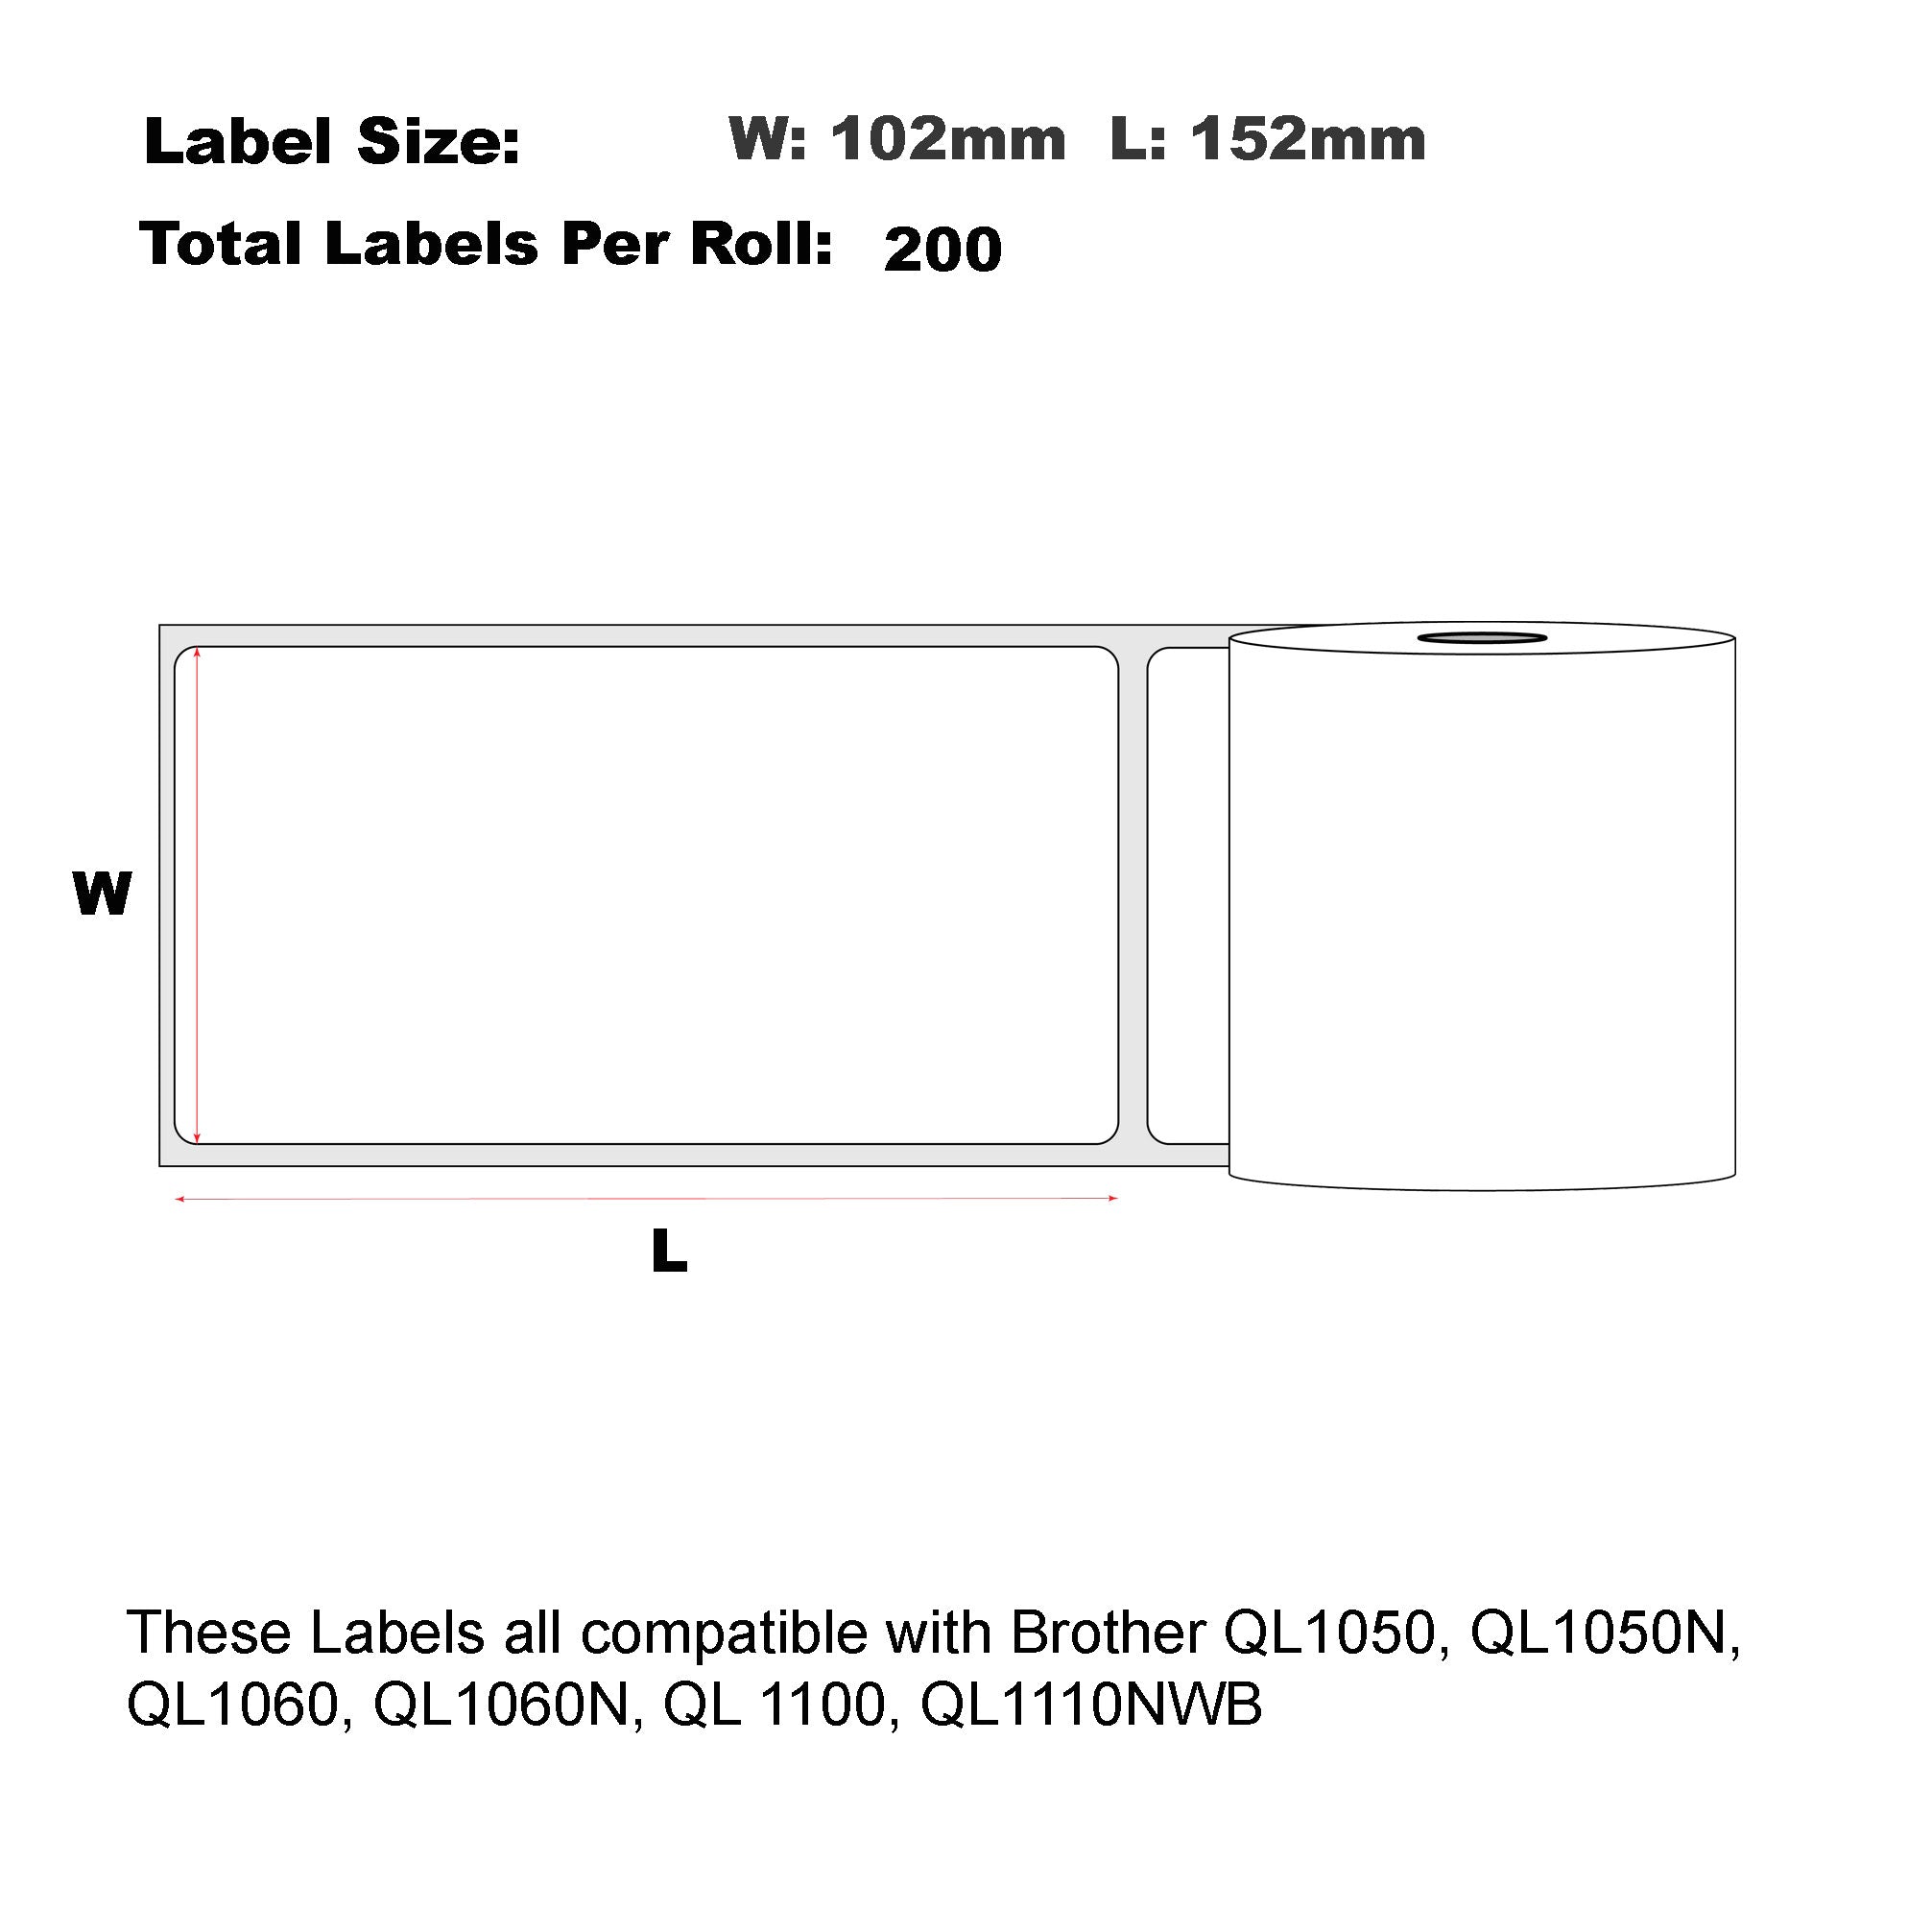 Compatible Brother DK-11241 Shipping Refill Labels 102mm x 152mm 200 Labels Per Roll